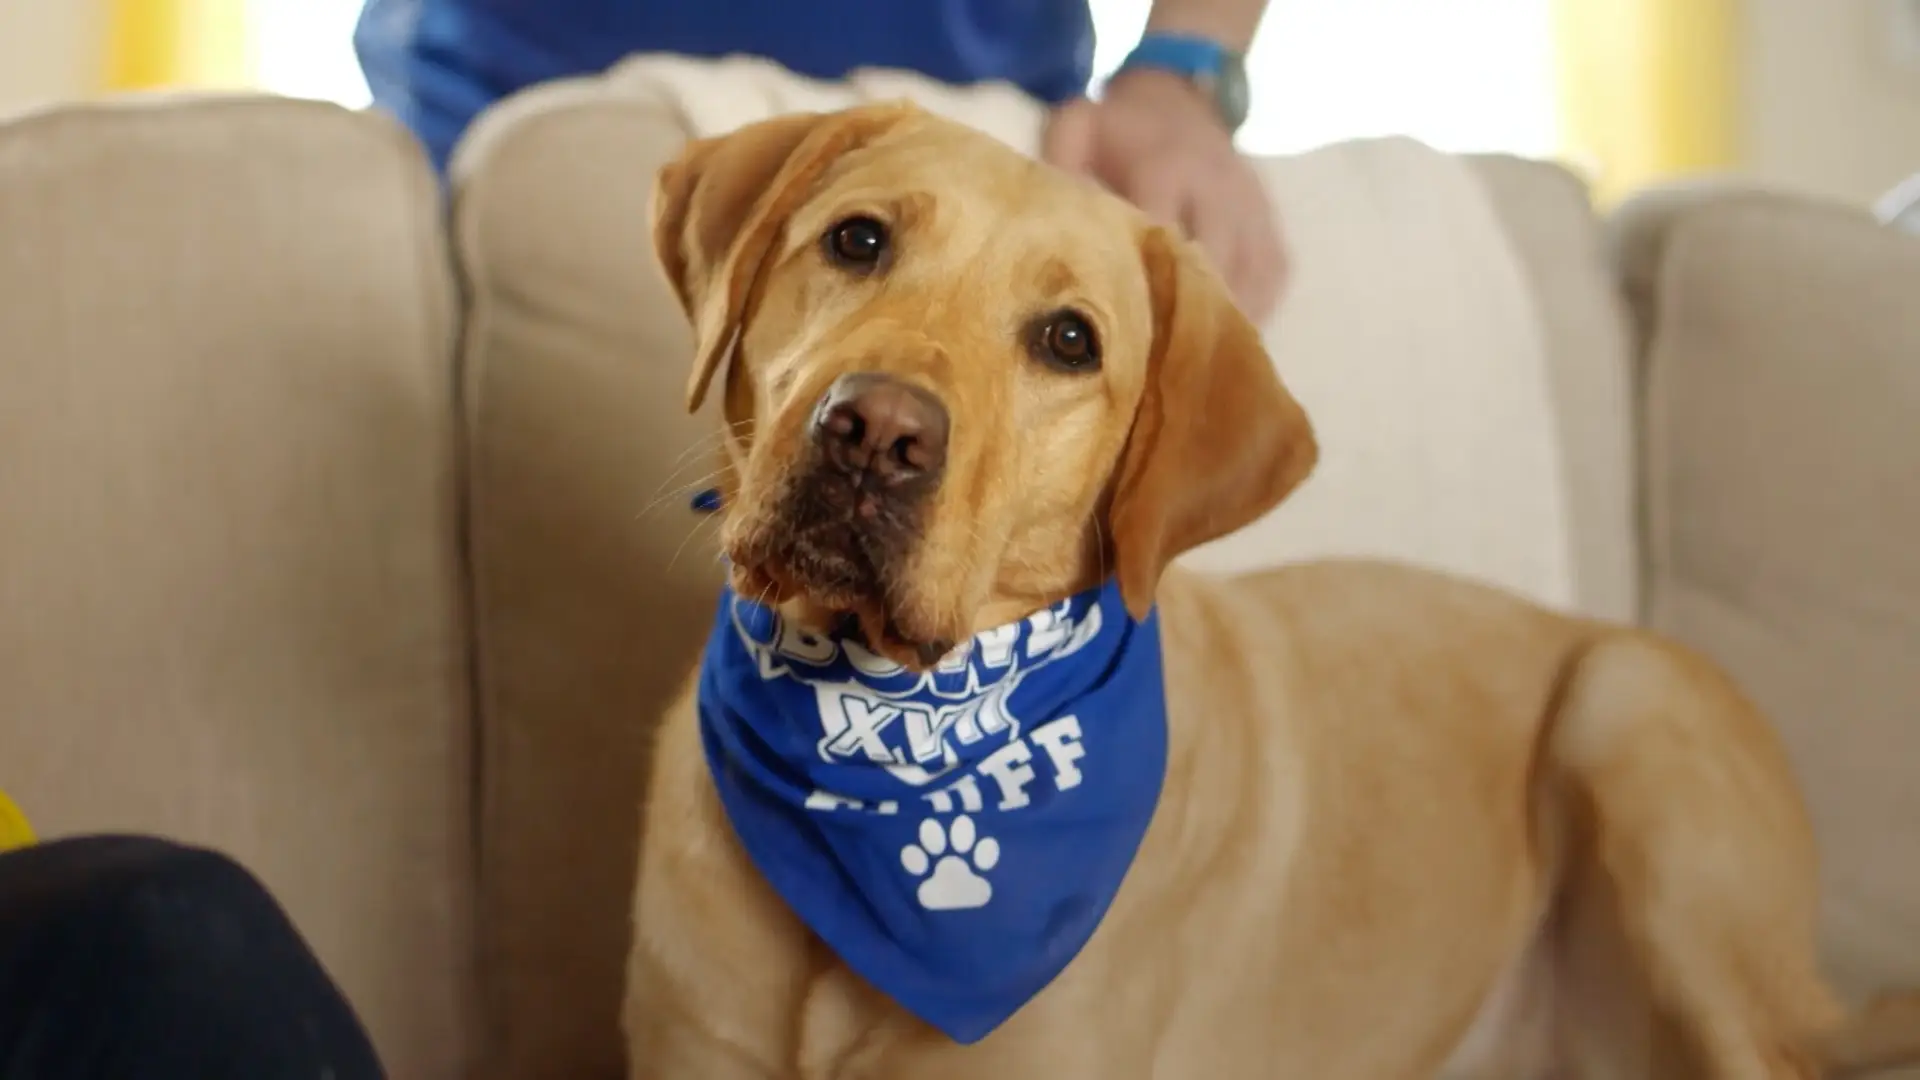 A dog wearing a blue bandana featuring entertainment, sitting on a couch.